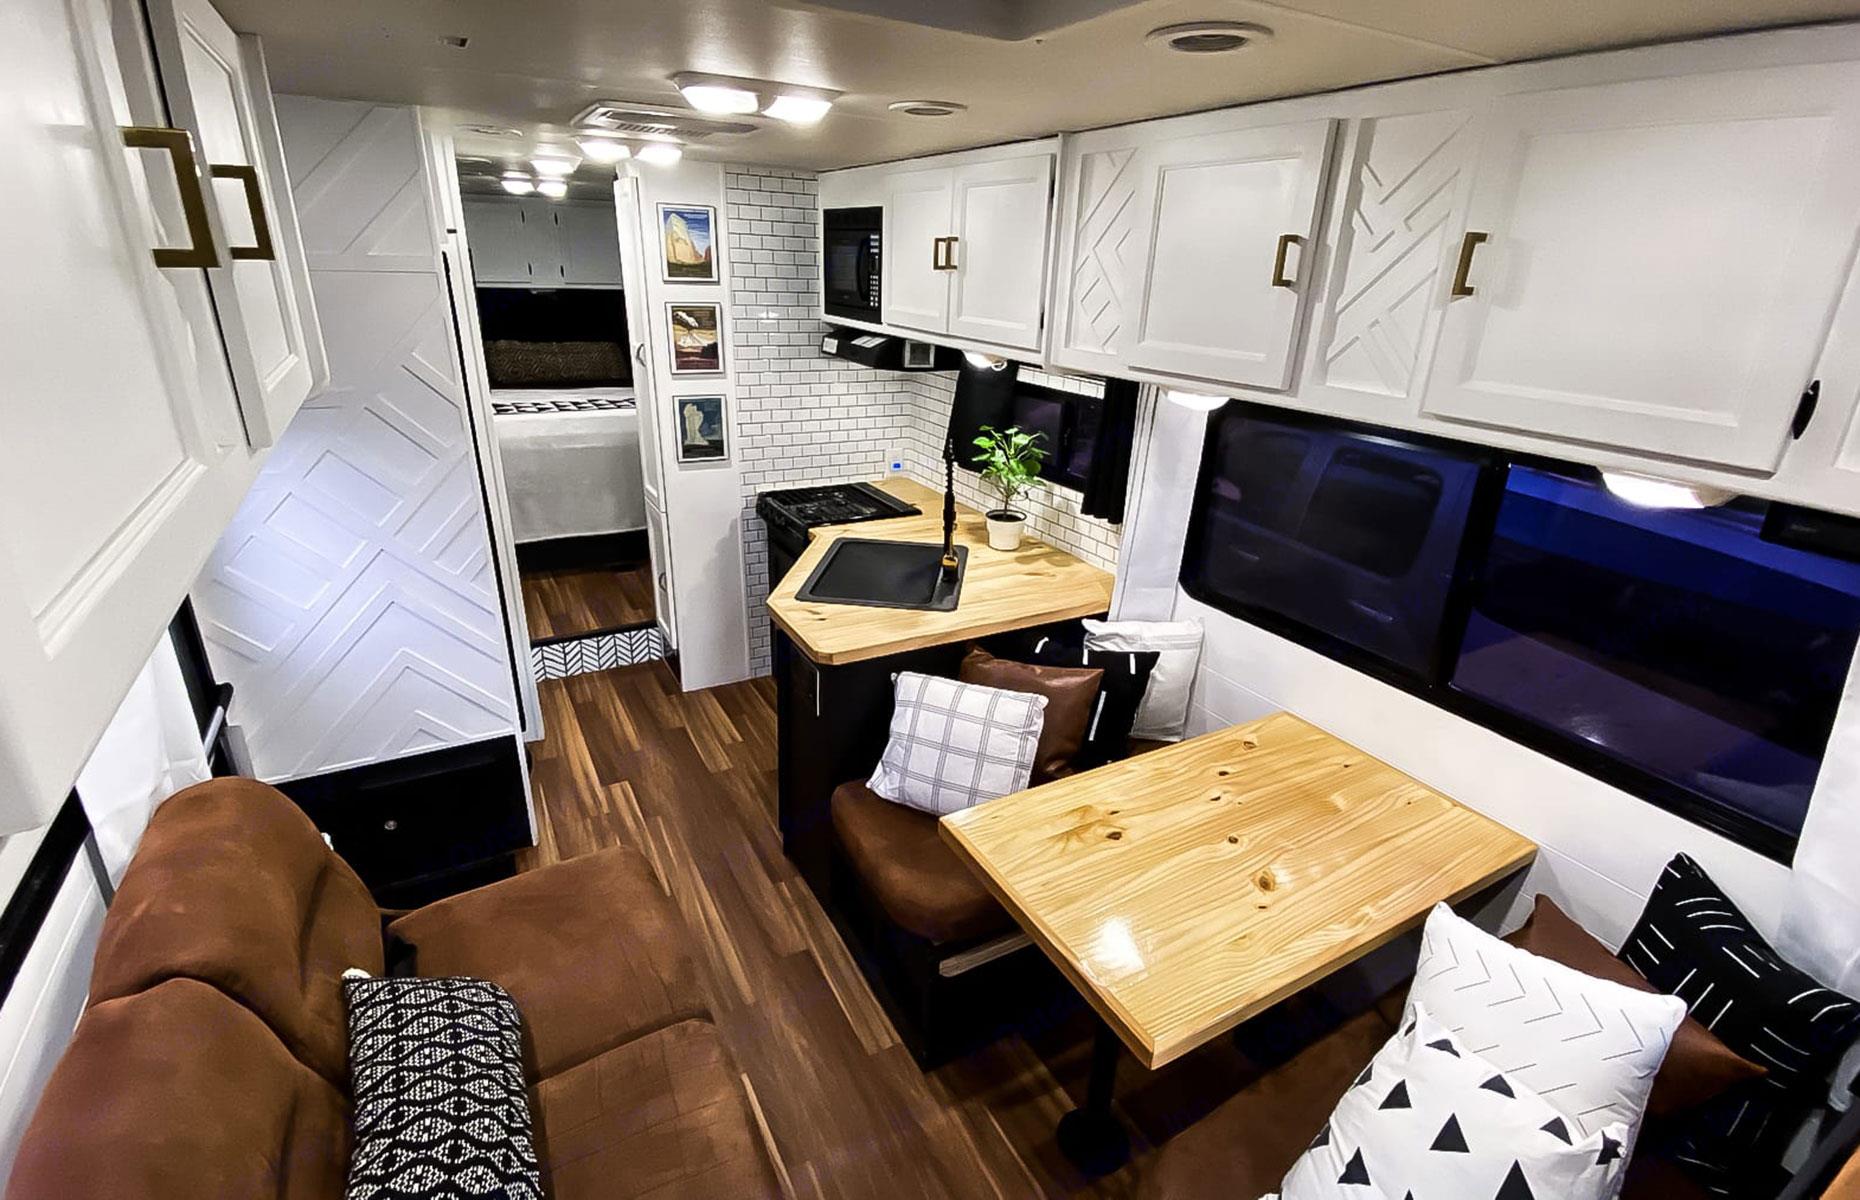 The RV’s sleek kitchen comes fully stocked with a microwave, stove, Keurig K-Cup coffee maker, cooking utensils, dishes, pots and pans and a drying rack. Opposite, the living area’s dinette and sofa both transform into two cozy beds. A cabin bed sits above the front seats and also includes a pull out 32” TV with an HDMI TV adapter for streaming from your mobile device, perfect for those longer drives.